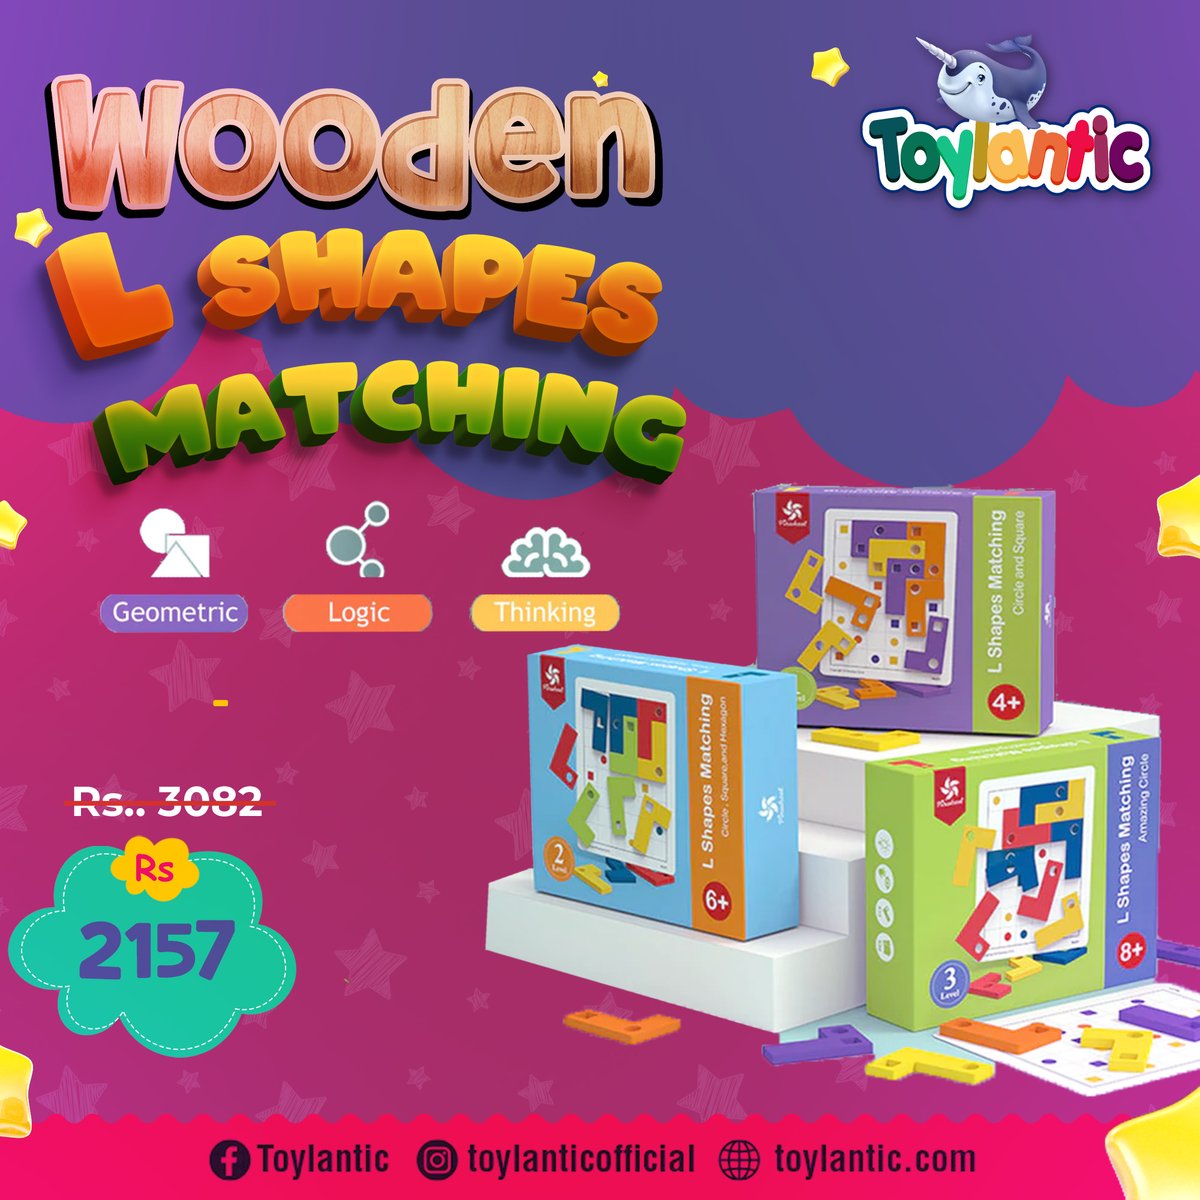 Let your child's Logical Thinking grow 💖
Click the link below to explore more educational toys:
toylantic.com/.../toys-by-ca…...
For Details & Queries
0334 0008697
#woodenshapes #woodentoys #educationaltoys #kids #creative #learnwithfun #learningtoys #childgrowth #toys #toylantic